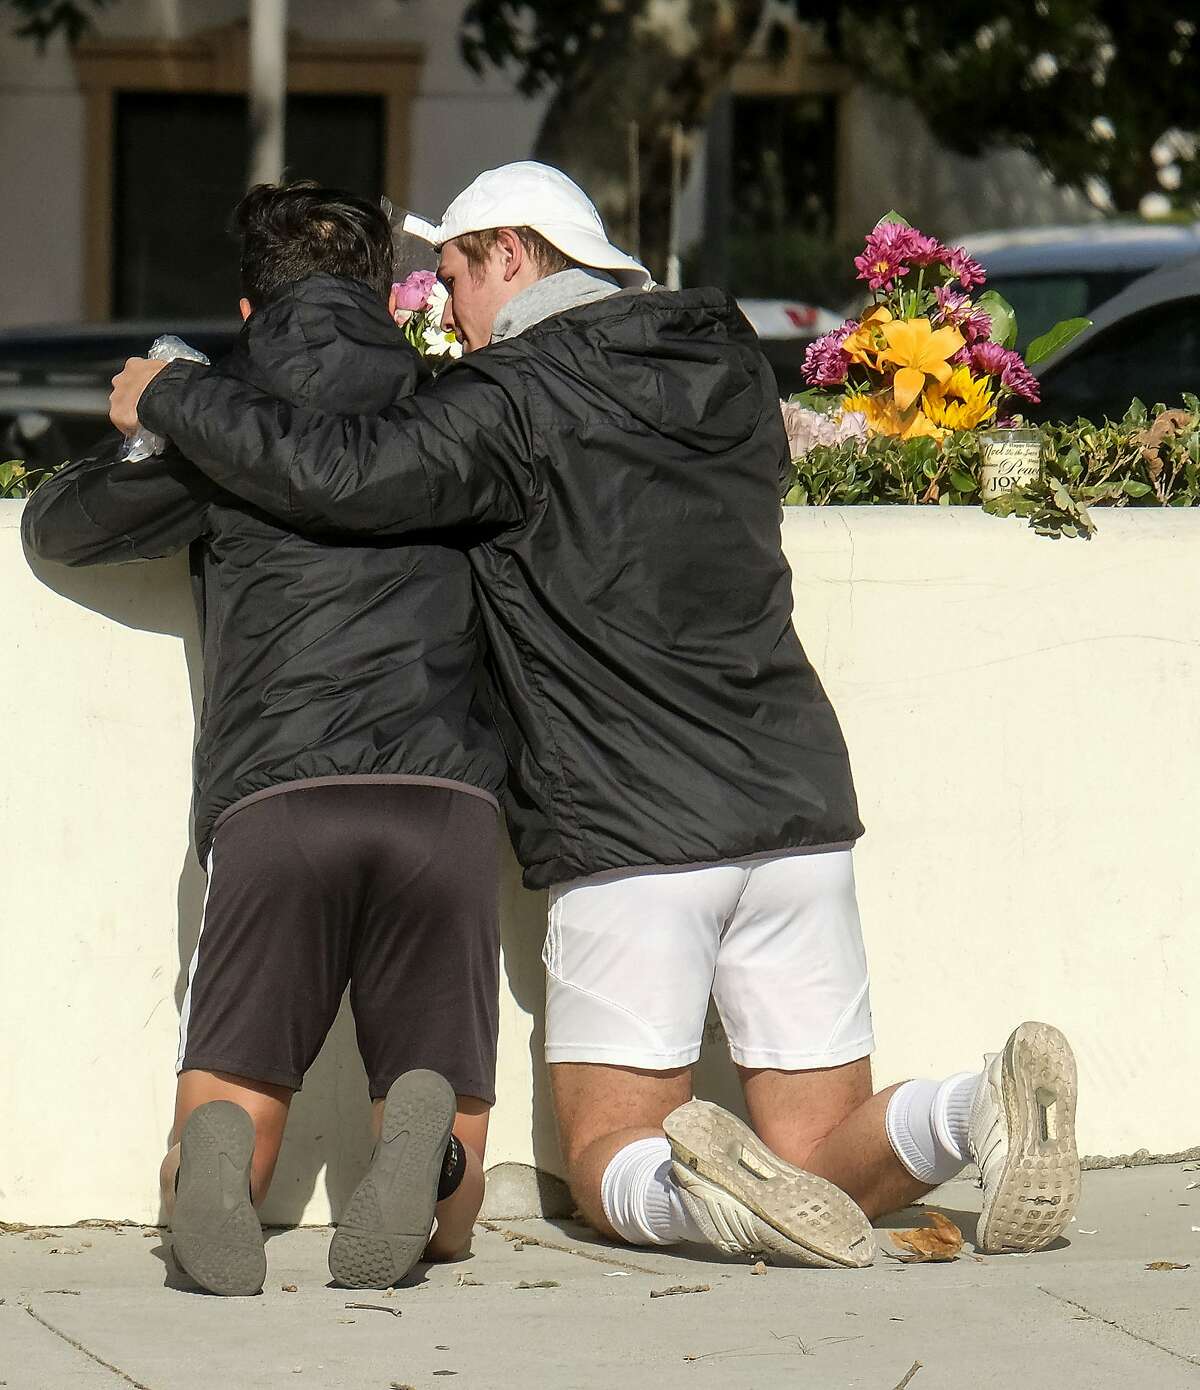 People place flowers near the scene of a mass shooting Thursday, Nov. 8, 2018, in Thousand Oaks, Calif., after a gunman opened fire Wednesday evening inside a country music bar, killing multiple people including a responding sheriff's sergeant. (AP Photo/Ringo H.W. Chiu)